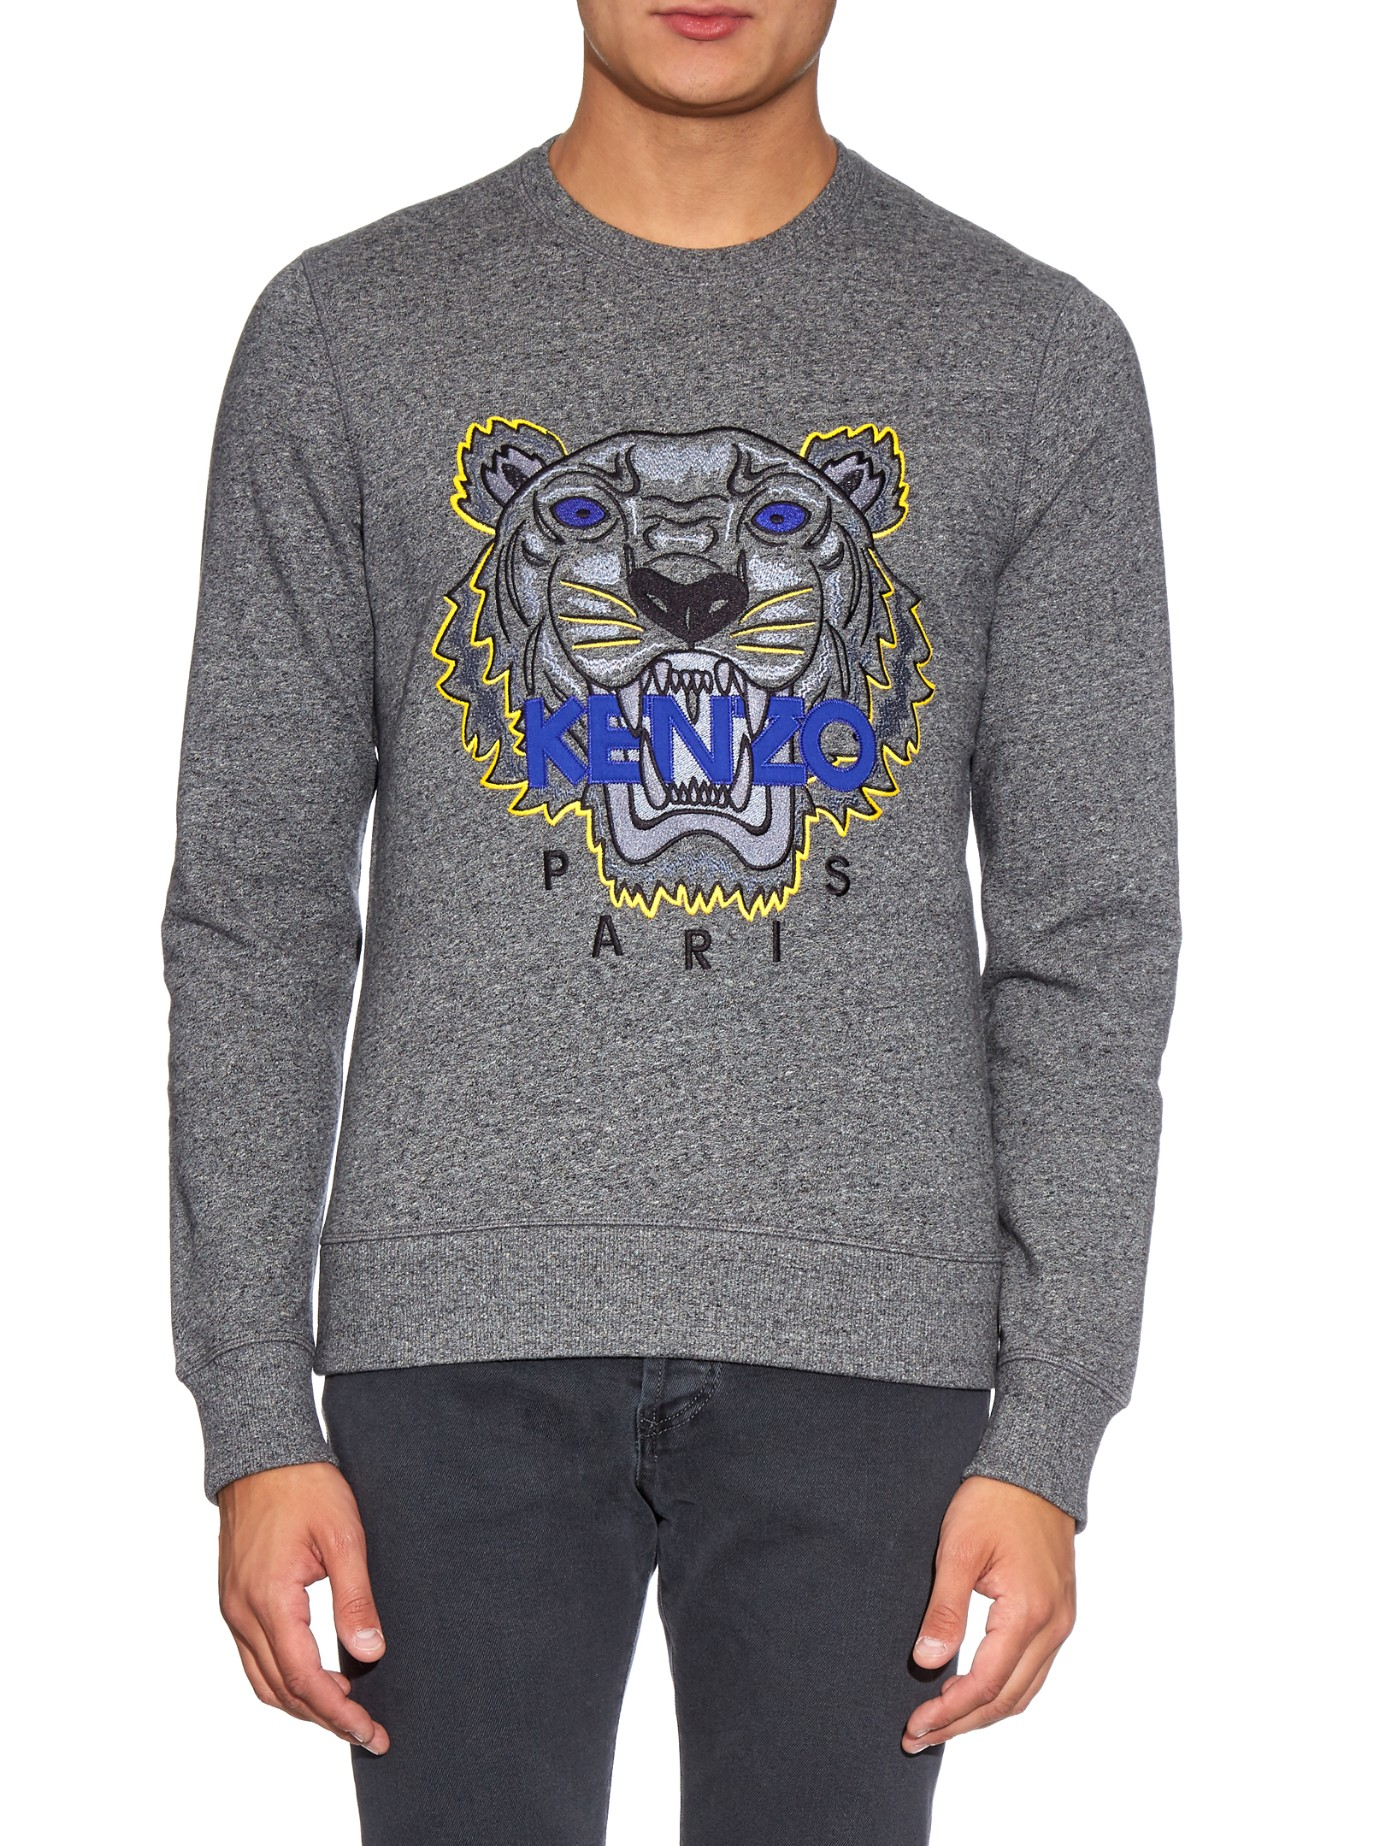 grey and blue kenzo jumper